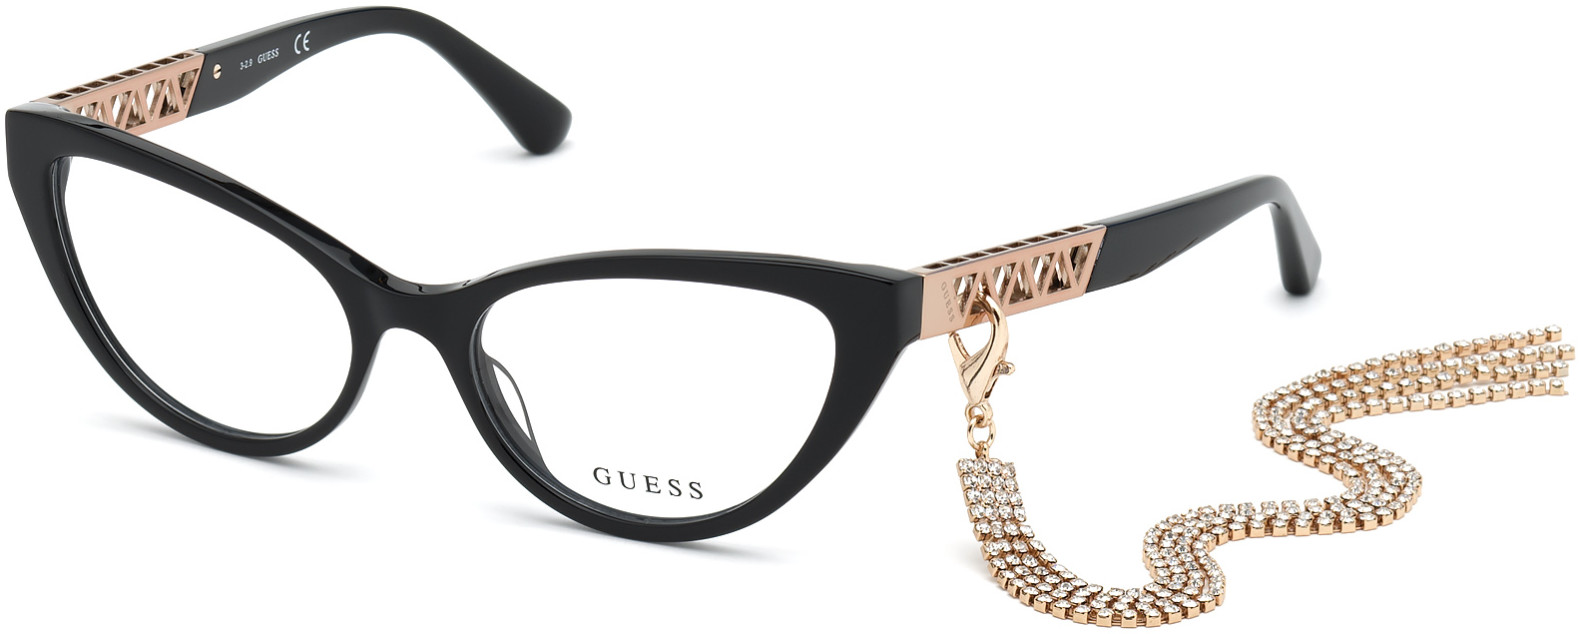 GUESS 2783